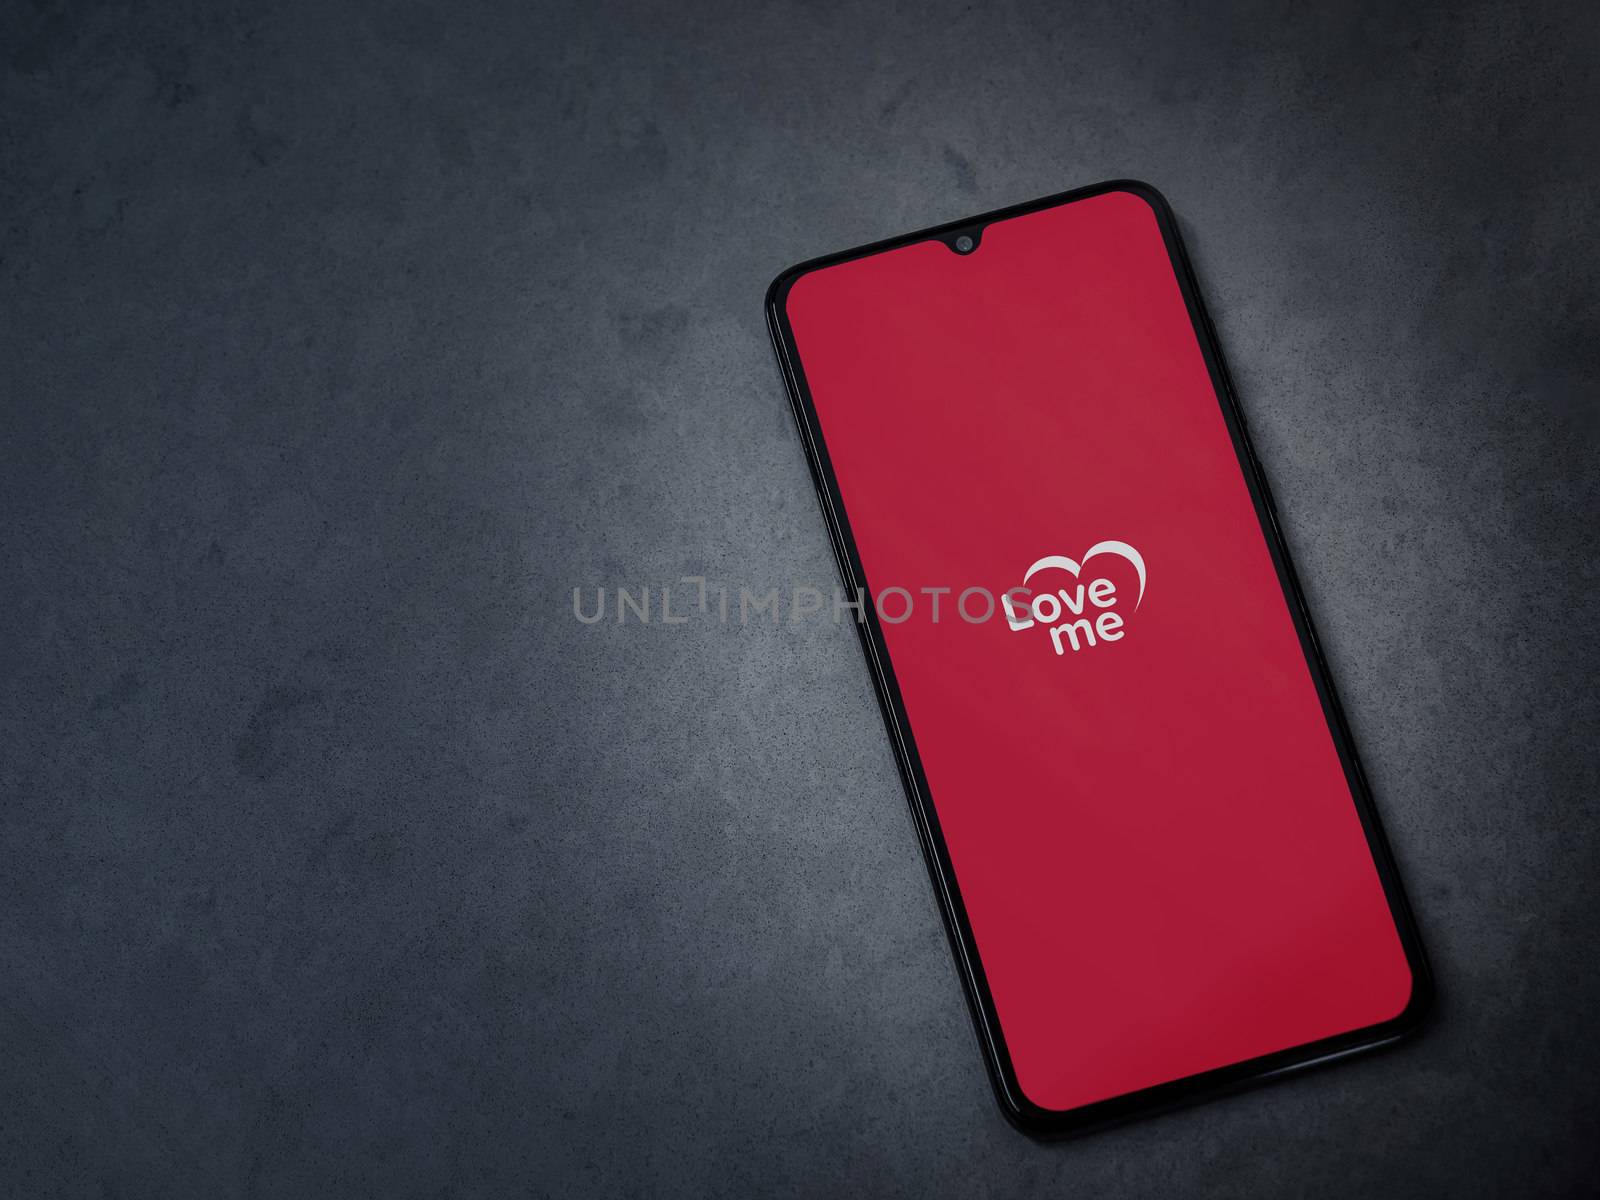 Lod, Israel - July 8, 2020: Loveme app launch screen with logo on the display of a black mobile smartphone on dark marble stone background. Top view flat lay with copy space.